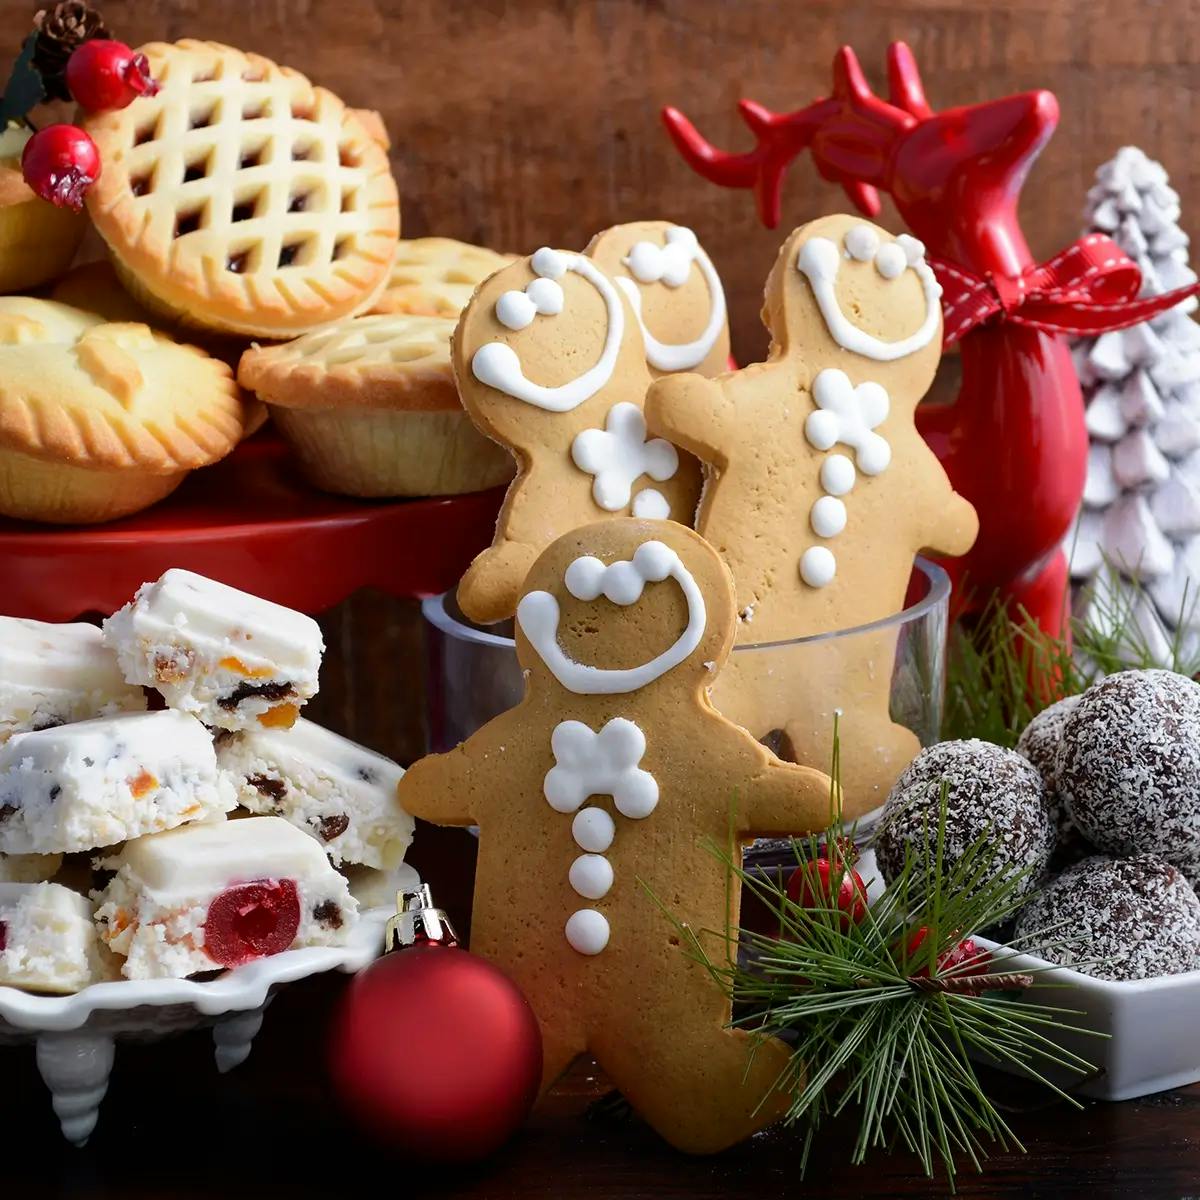 A Christmas dessert charcuterie board with mince pies, gingerbread men, truffles, and nougat.